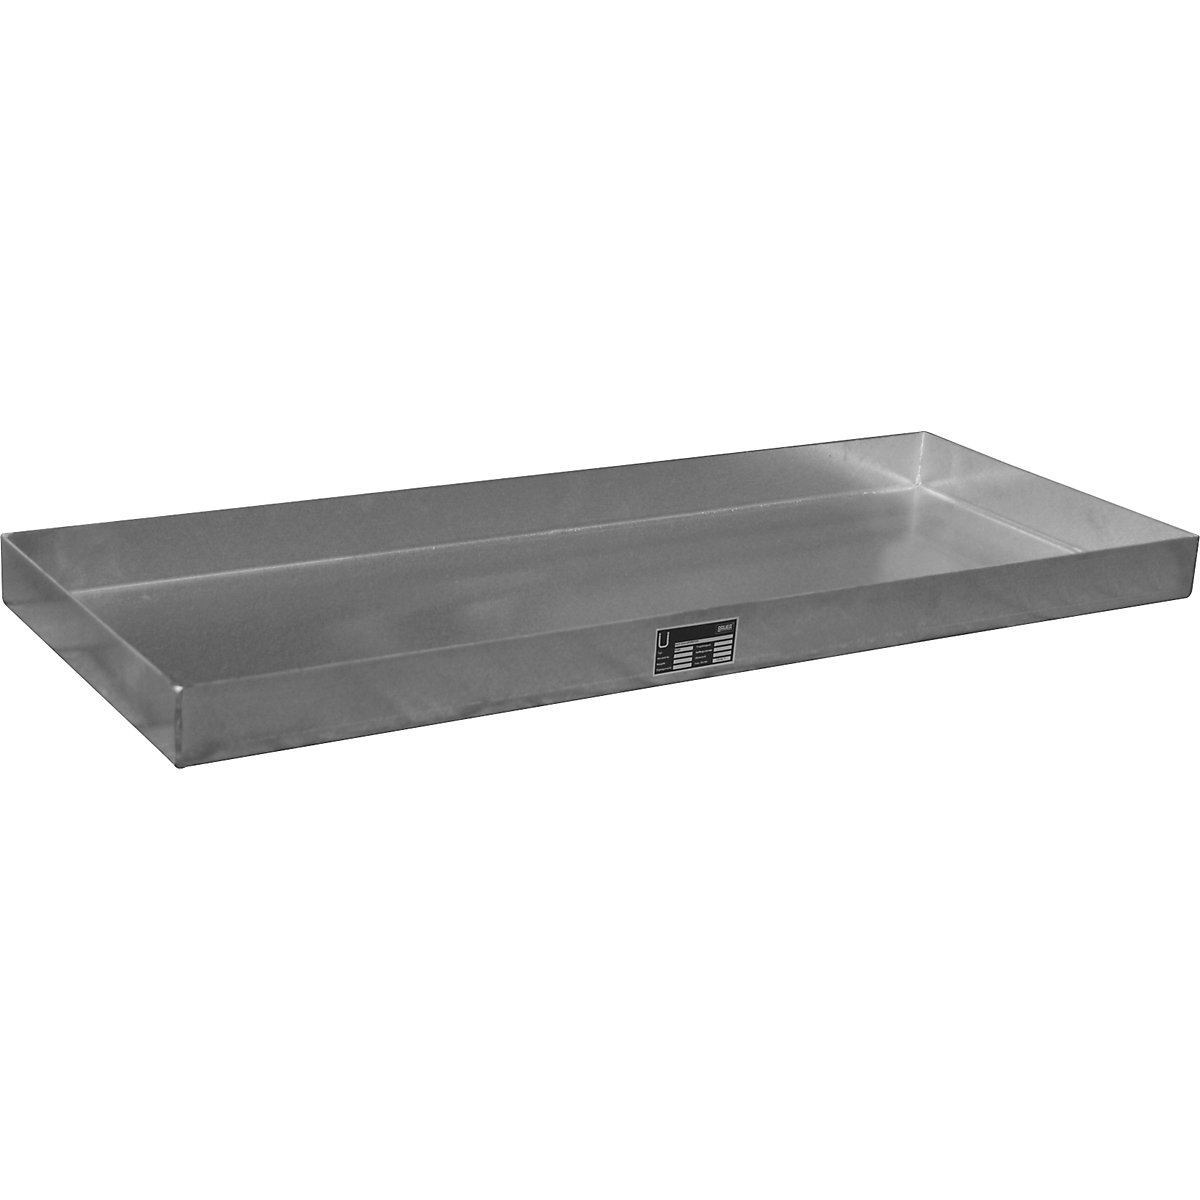 Stainless steel small container sump - eurokraft pro